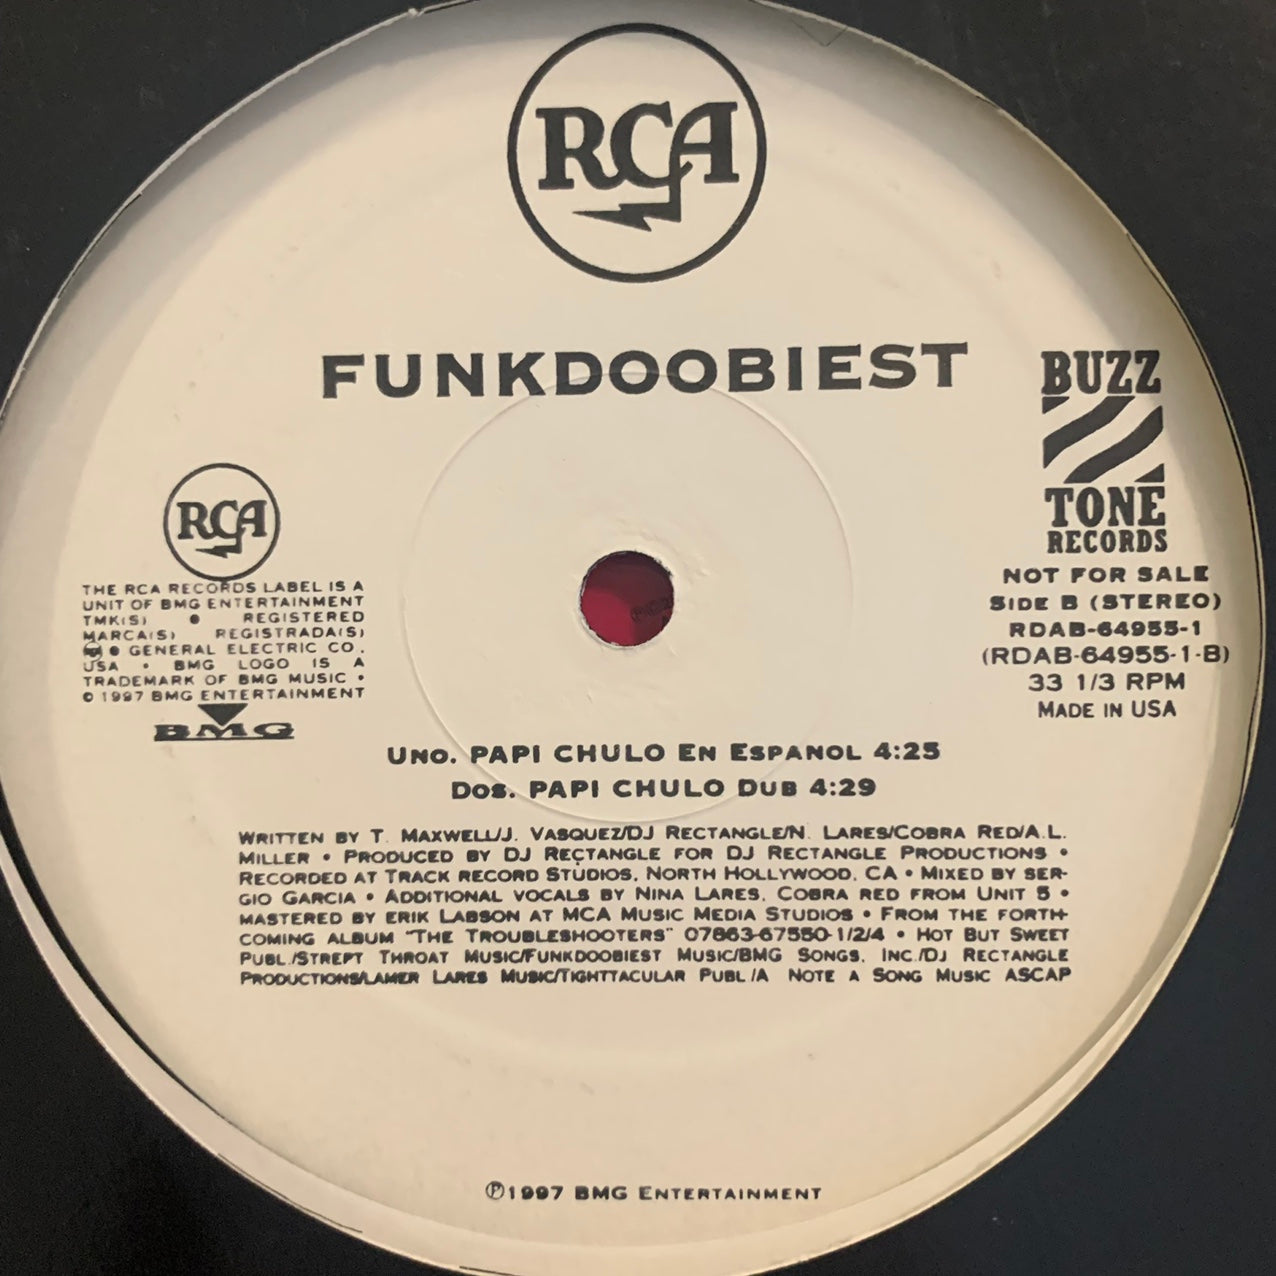 Funkdoobiest “Papi Chulo” 4 Version 12inch Vinyl, Featuring Spanish, English and Dub Versions